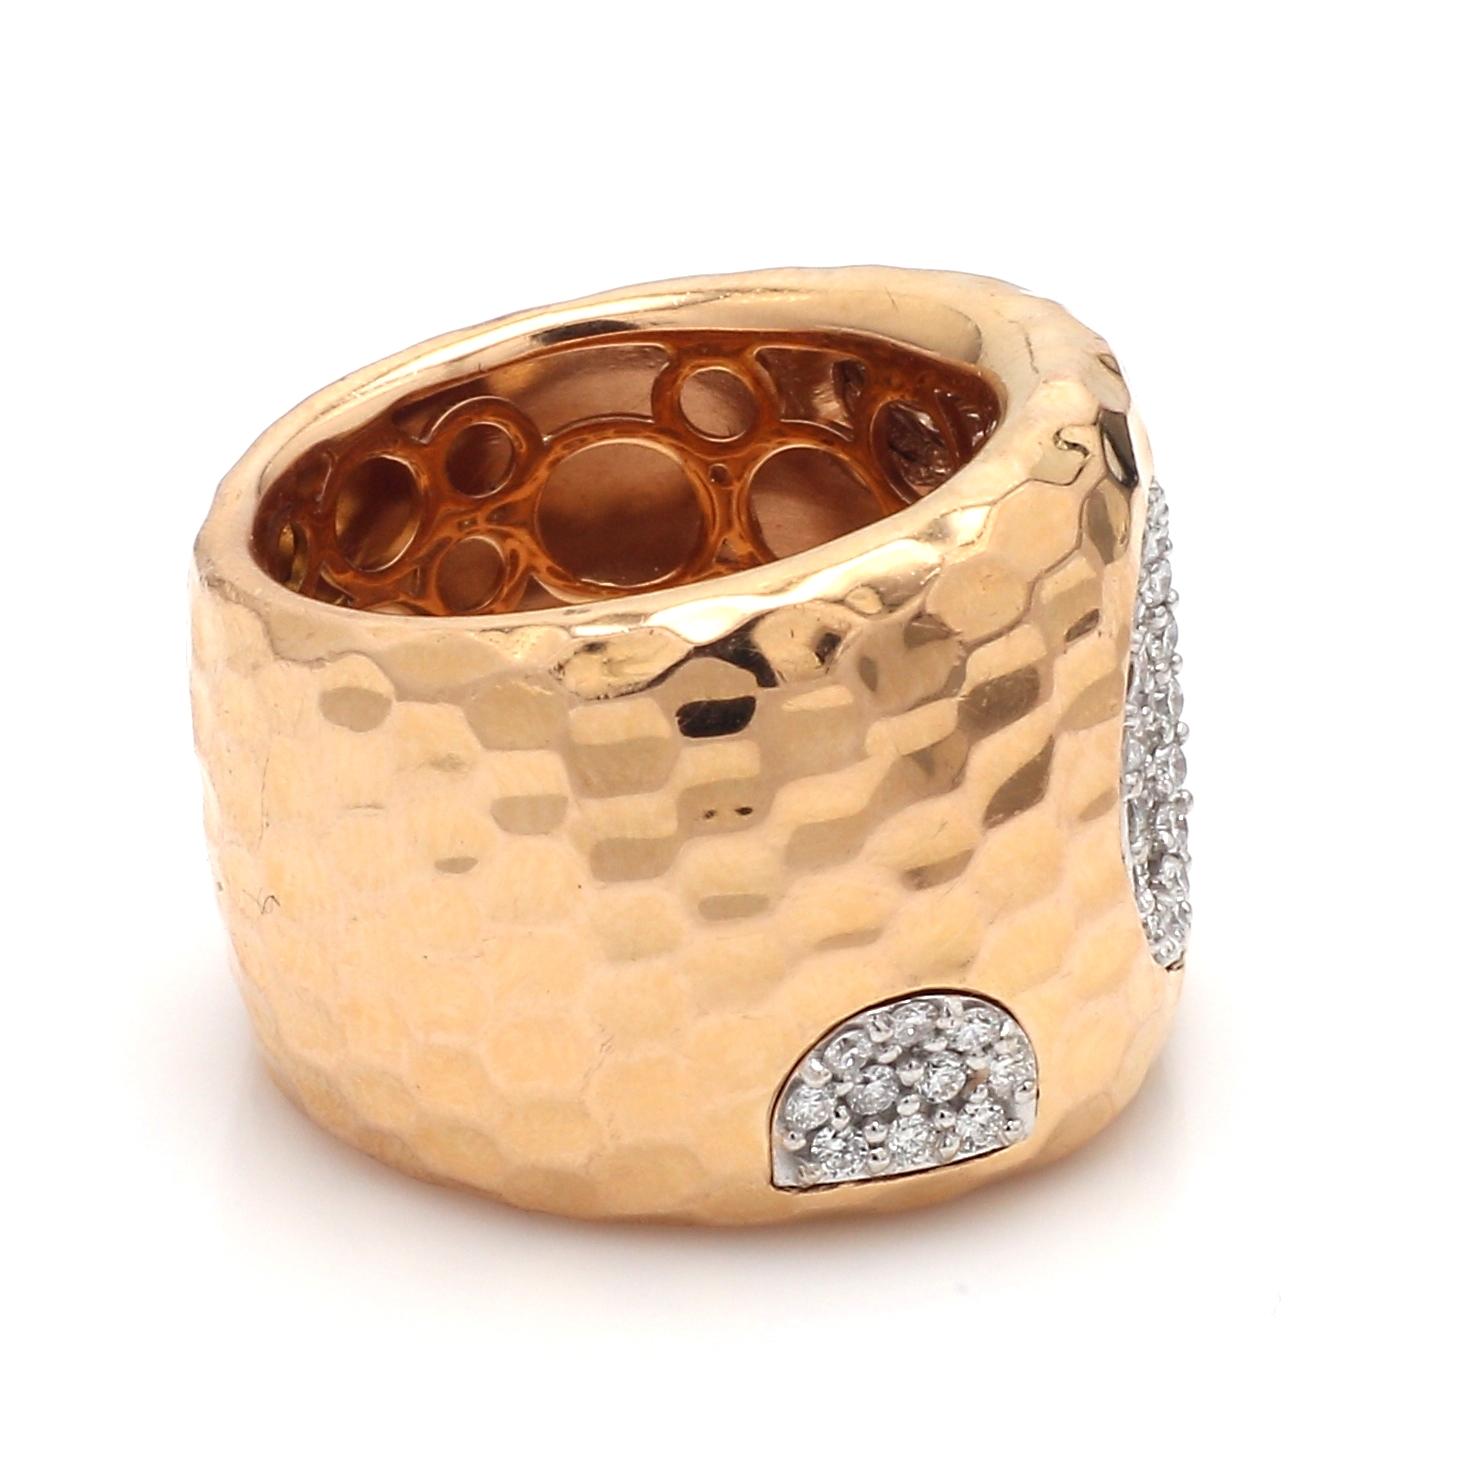 Roberto Coin, 18K rose gold, hammer-finished band. Band is set with sixty (60) round brilliant cut diamonds weighing approximately 1.00ctw. Band weighs 21.7 grams and is a size 6.5. 
All questions answered.
All reasonable offers are considered!